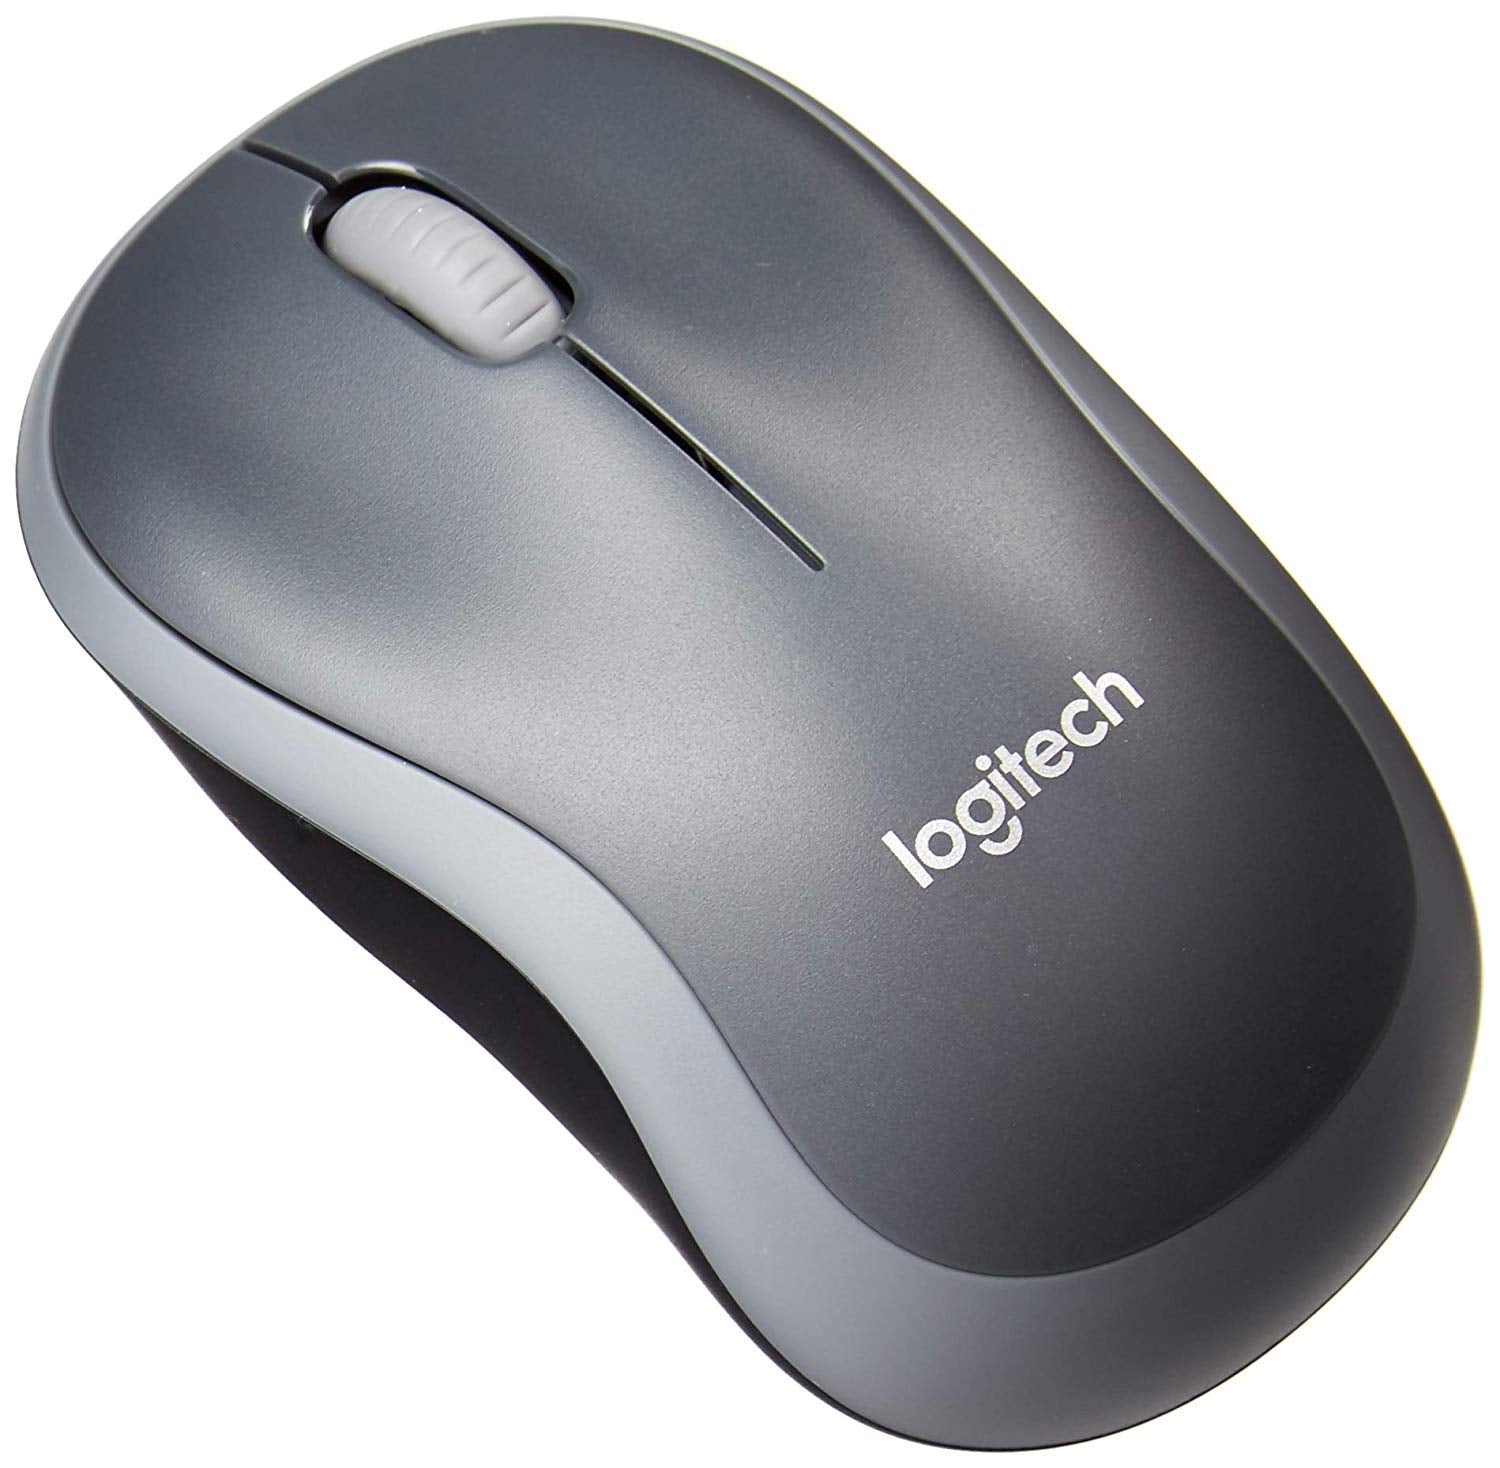 Logitech M185 Wireless Mouse for Computers Laptops Fast Scrolling Bundle (8-Pack + Stylus)